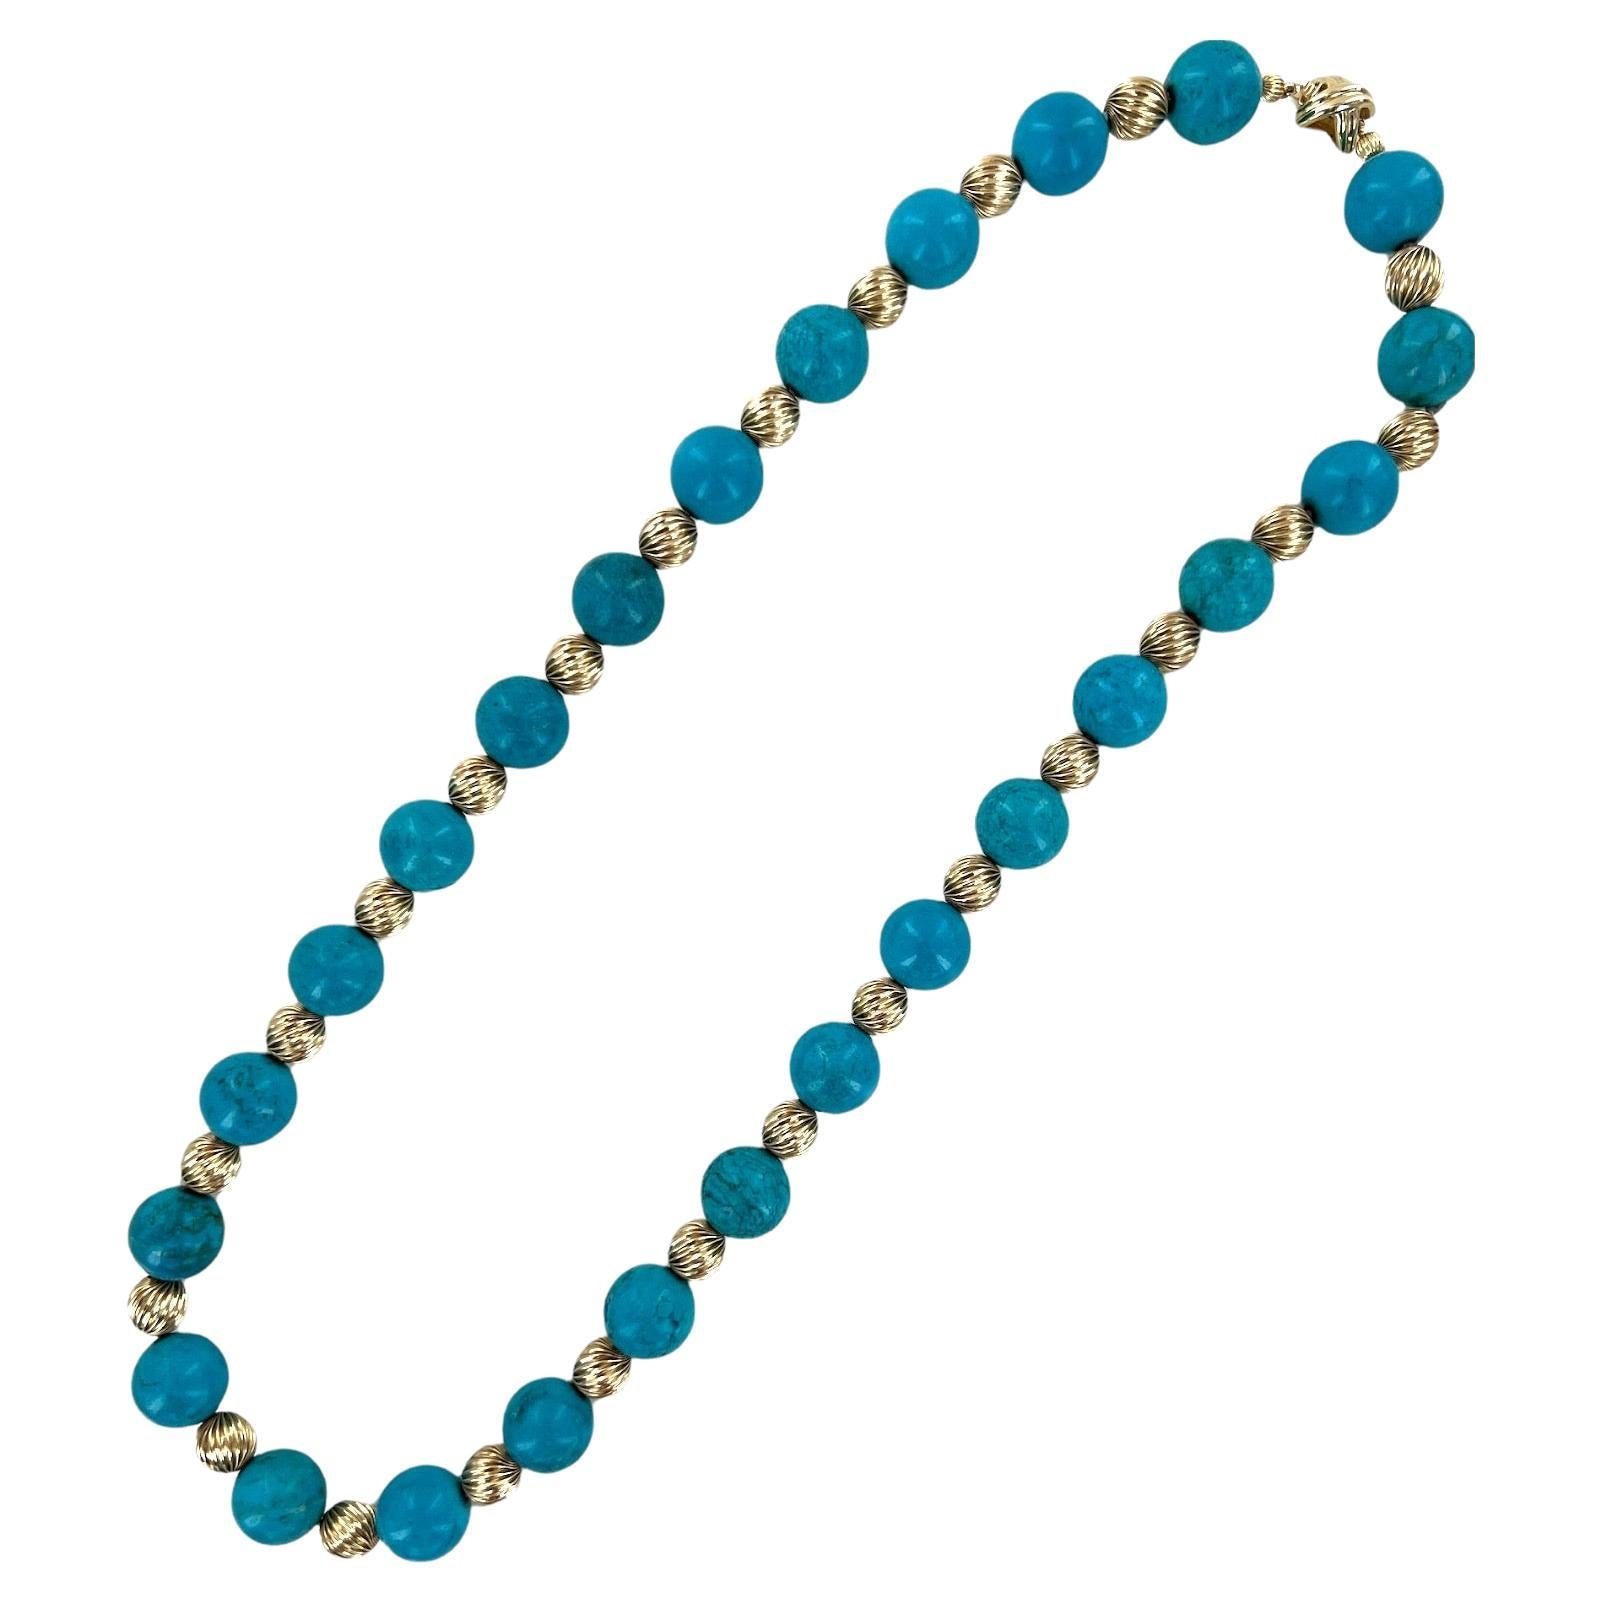 Tiffany & Co. Turquoise Bead 14 Karat Yellow Gold x Clasp Estate Necklace